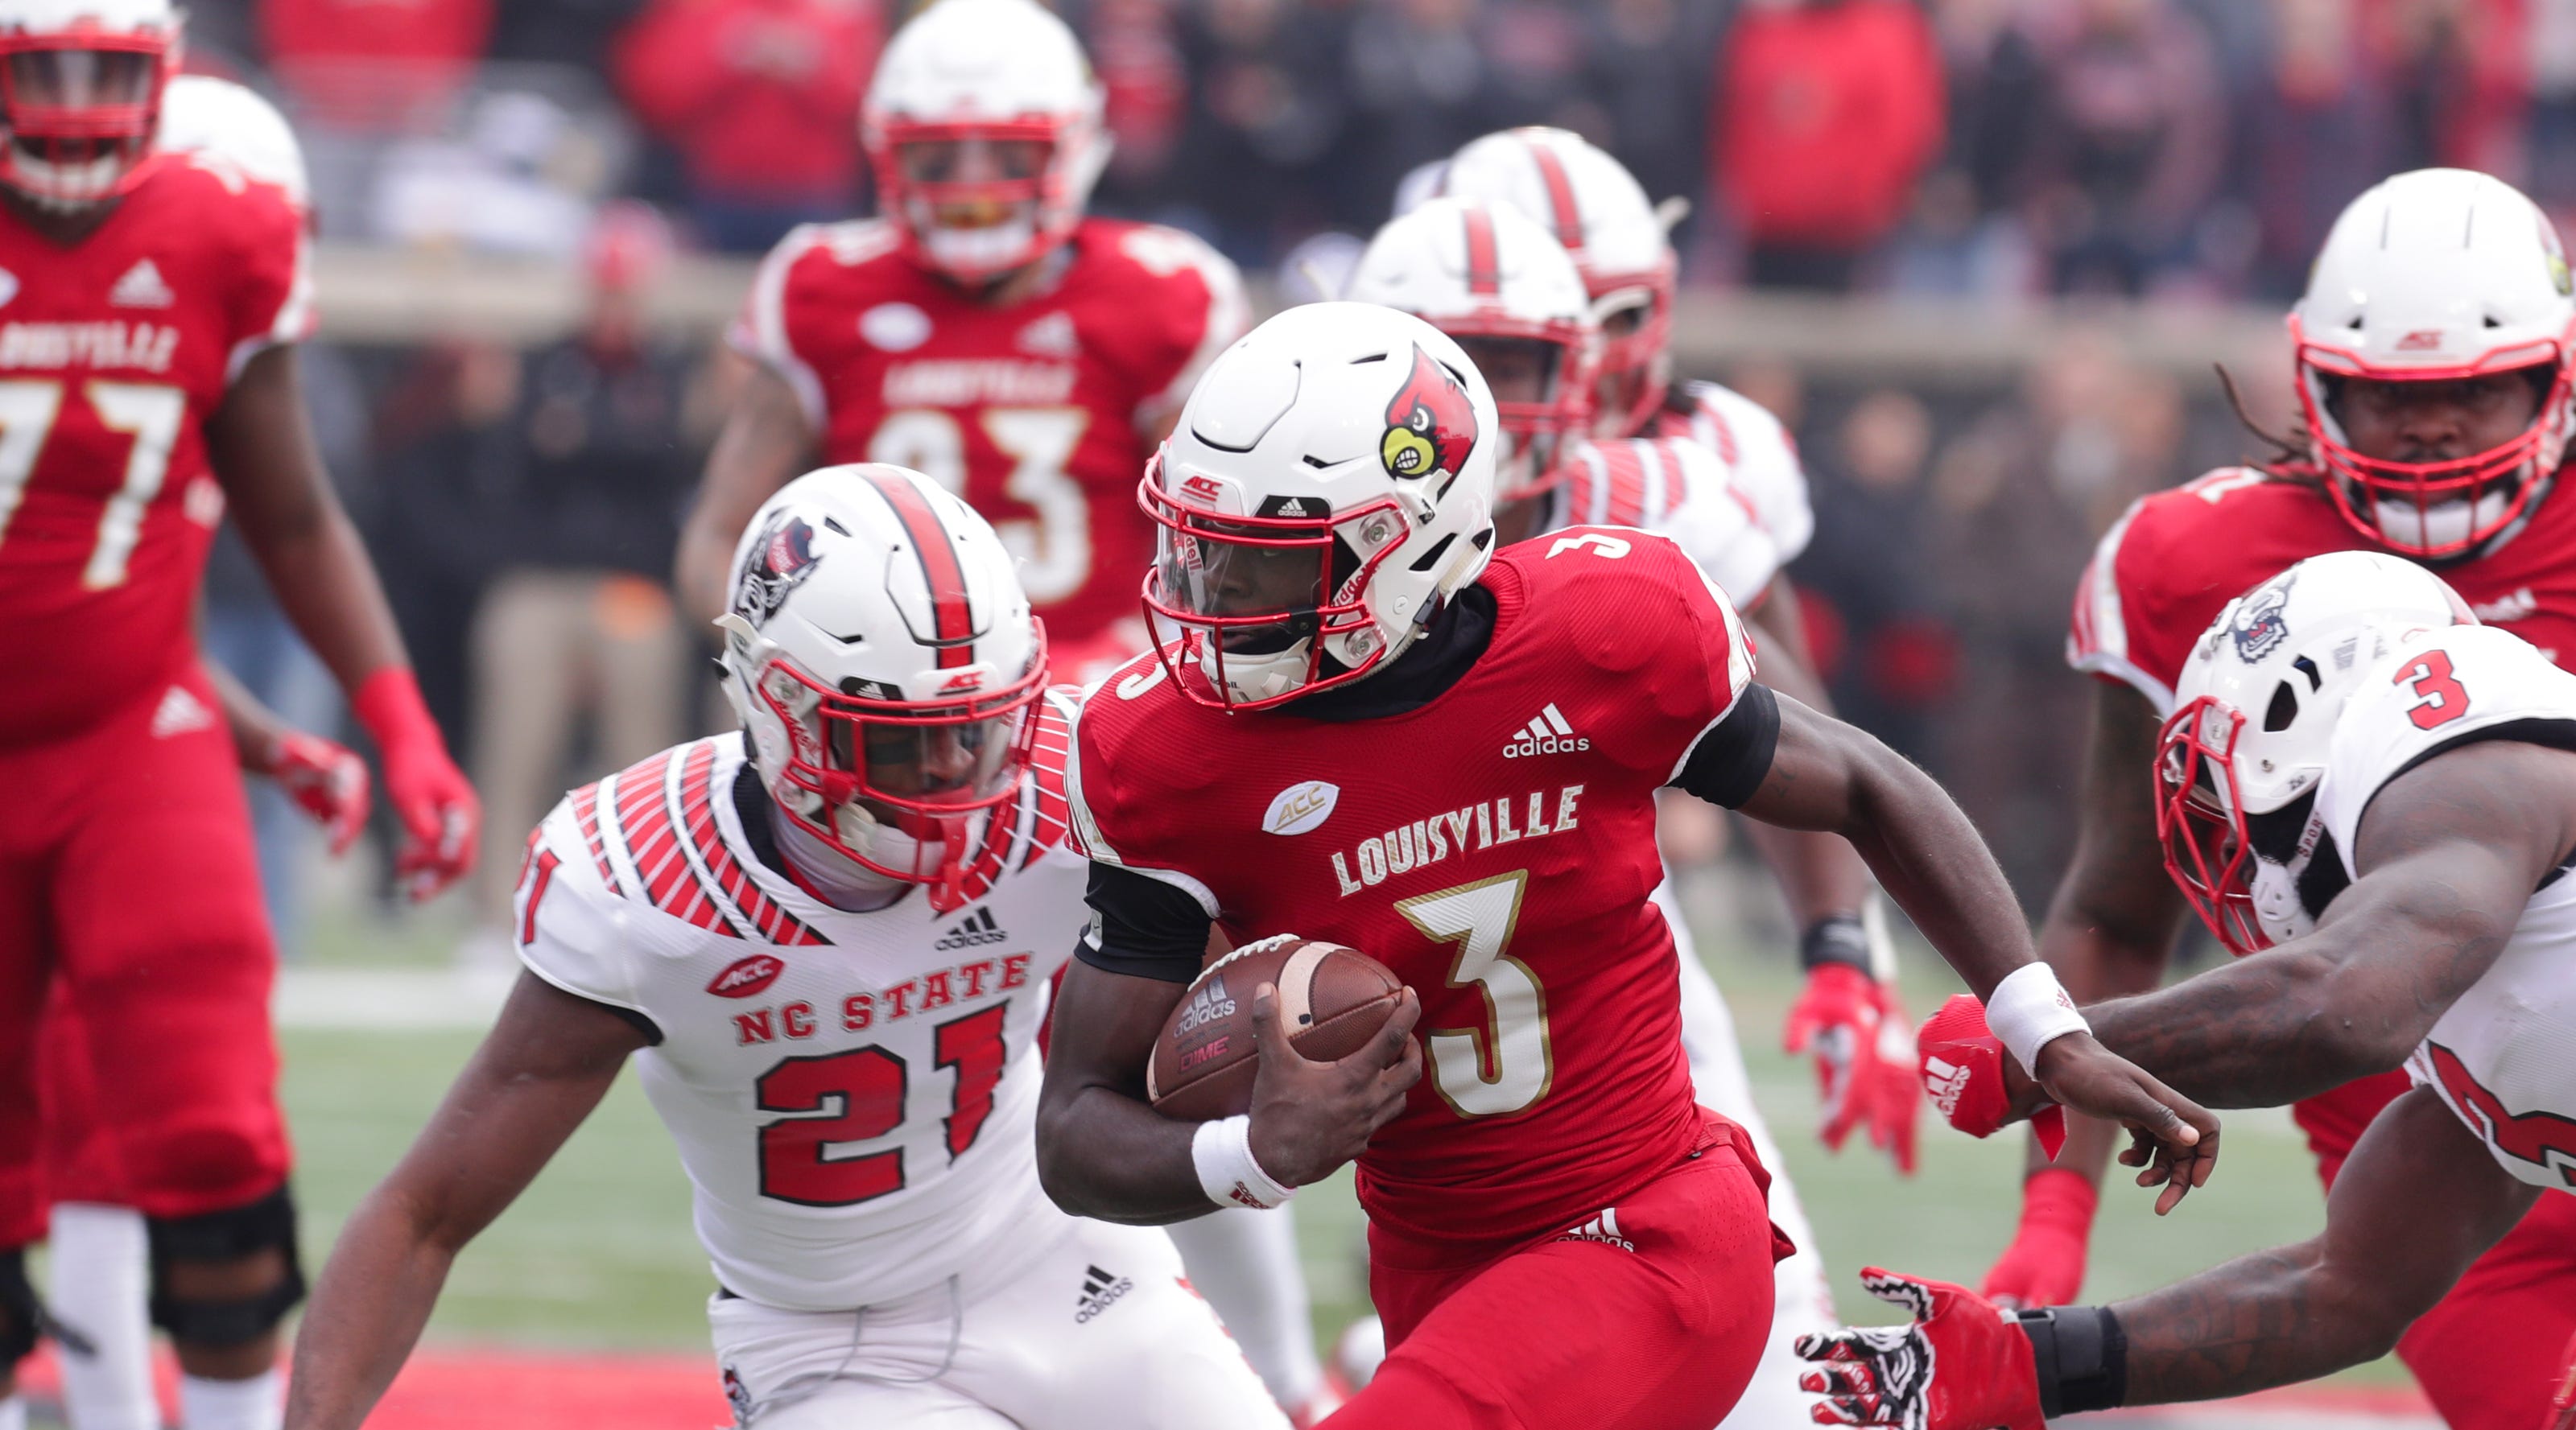 Louisville football schedule: Dates and times for 2020 games